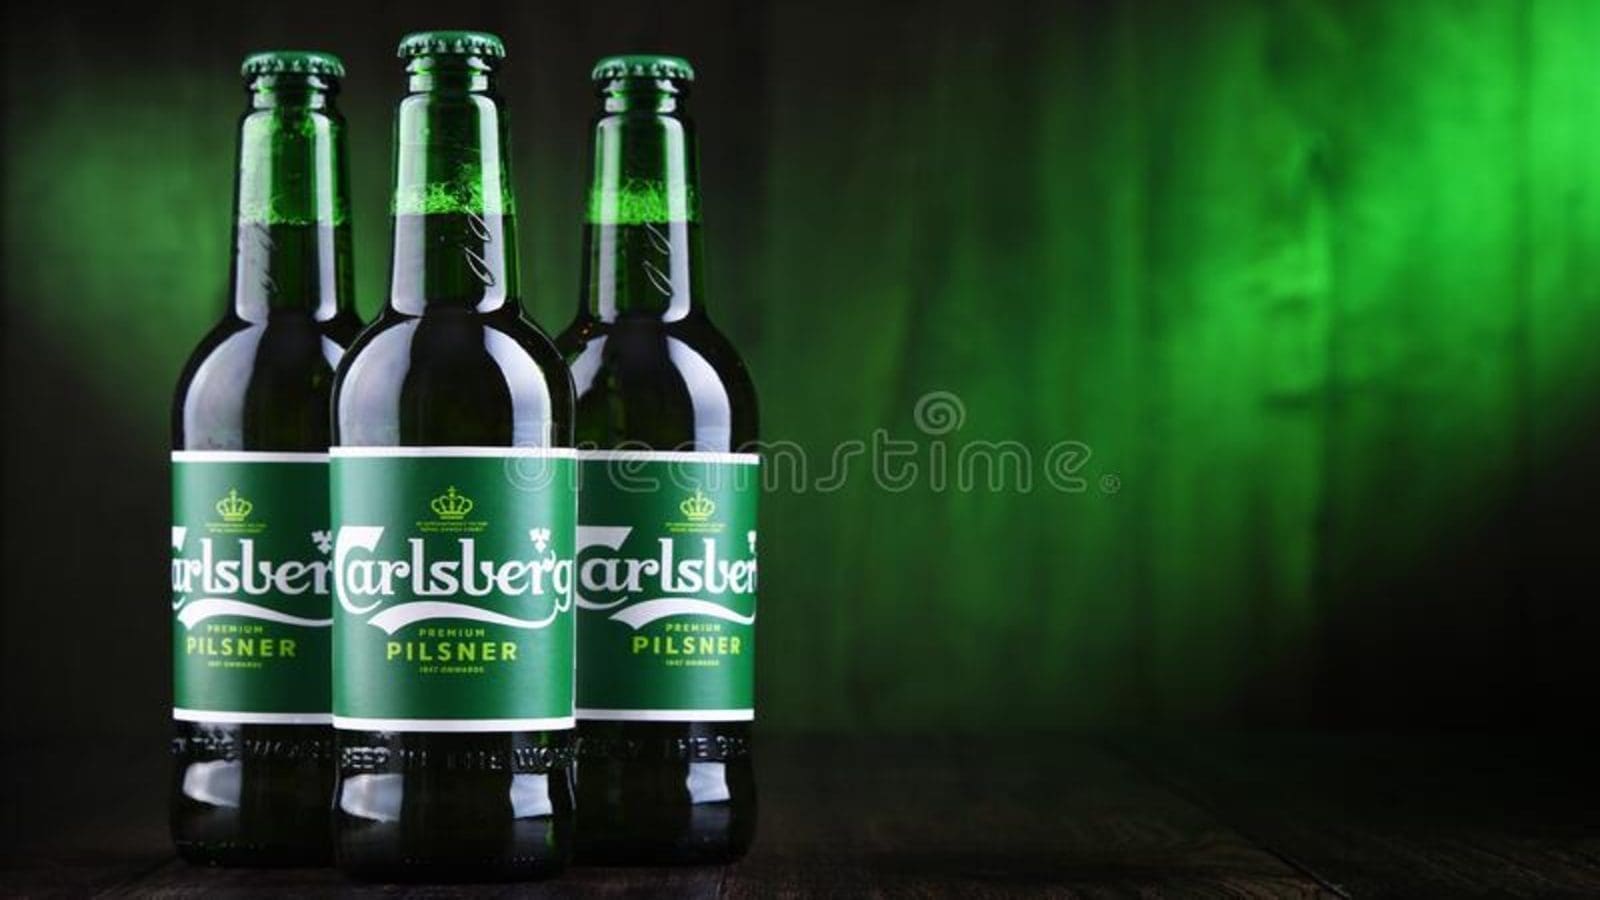 Carlsberg reports 11.6% rise in Q3 revenue driven by strong demand in Asian markets